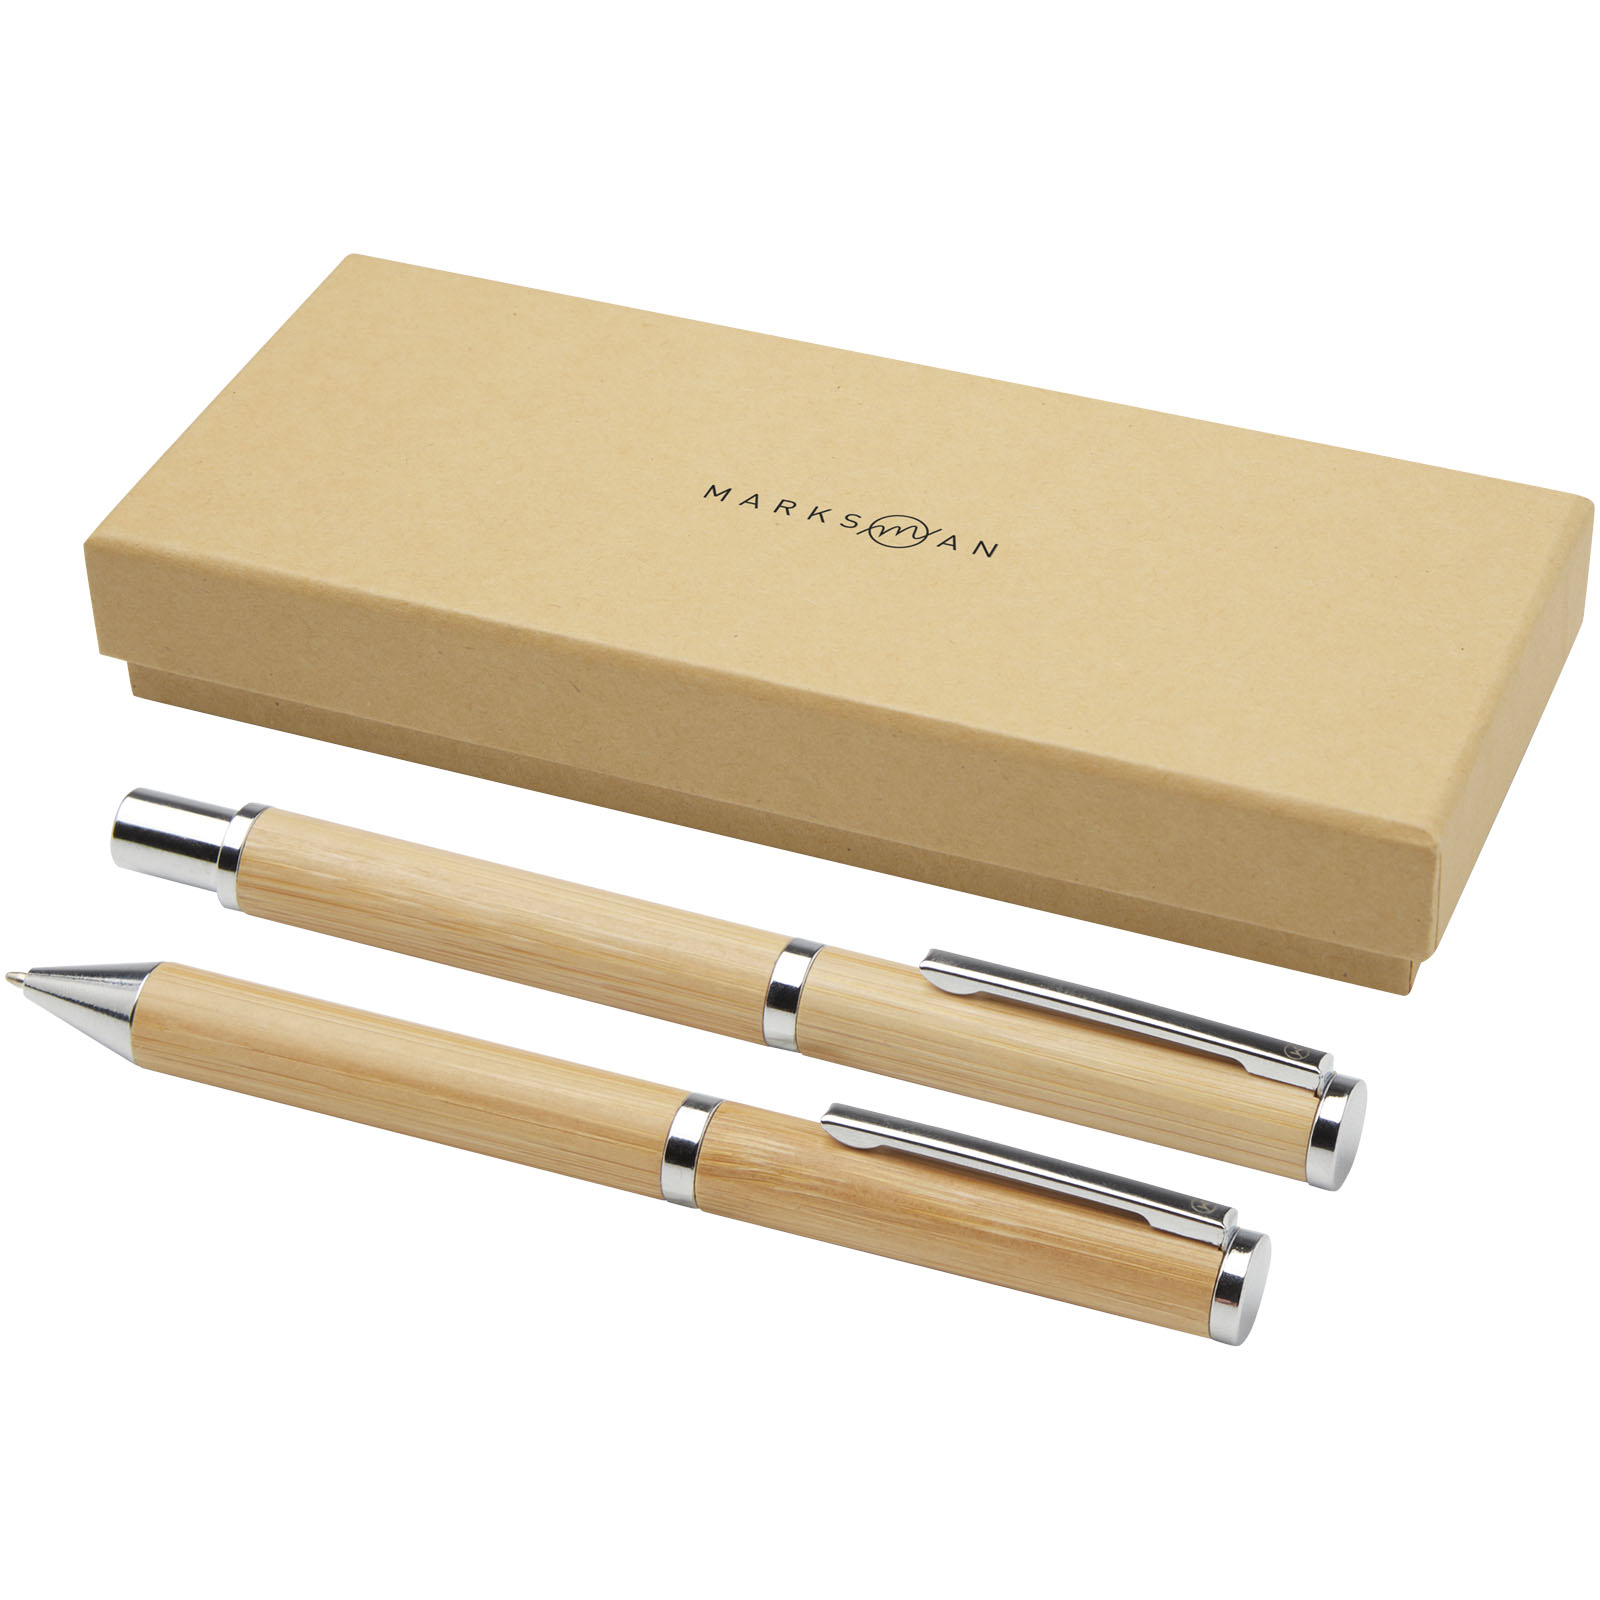 Pens & Writing - Apolys bamboo ballpoint and rollerball pen gift set 